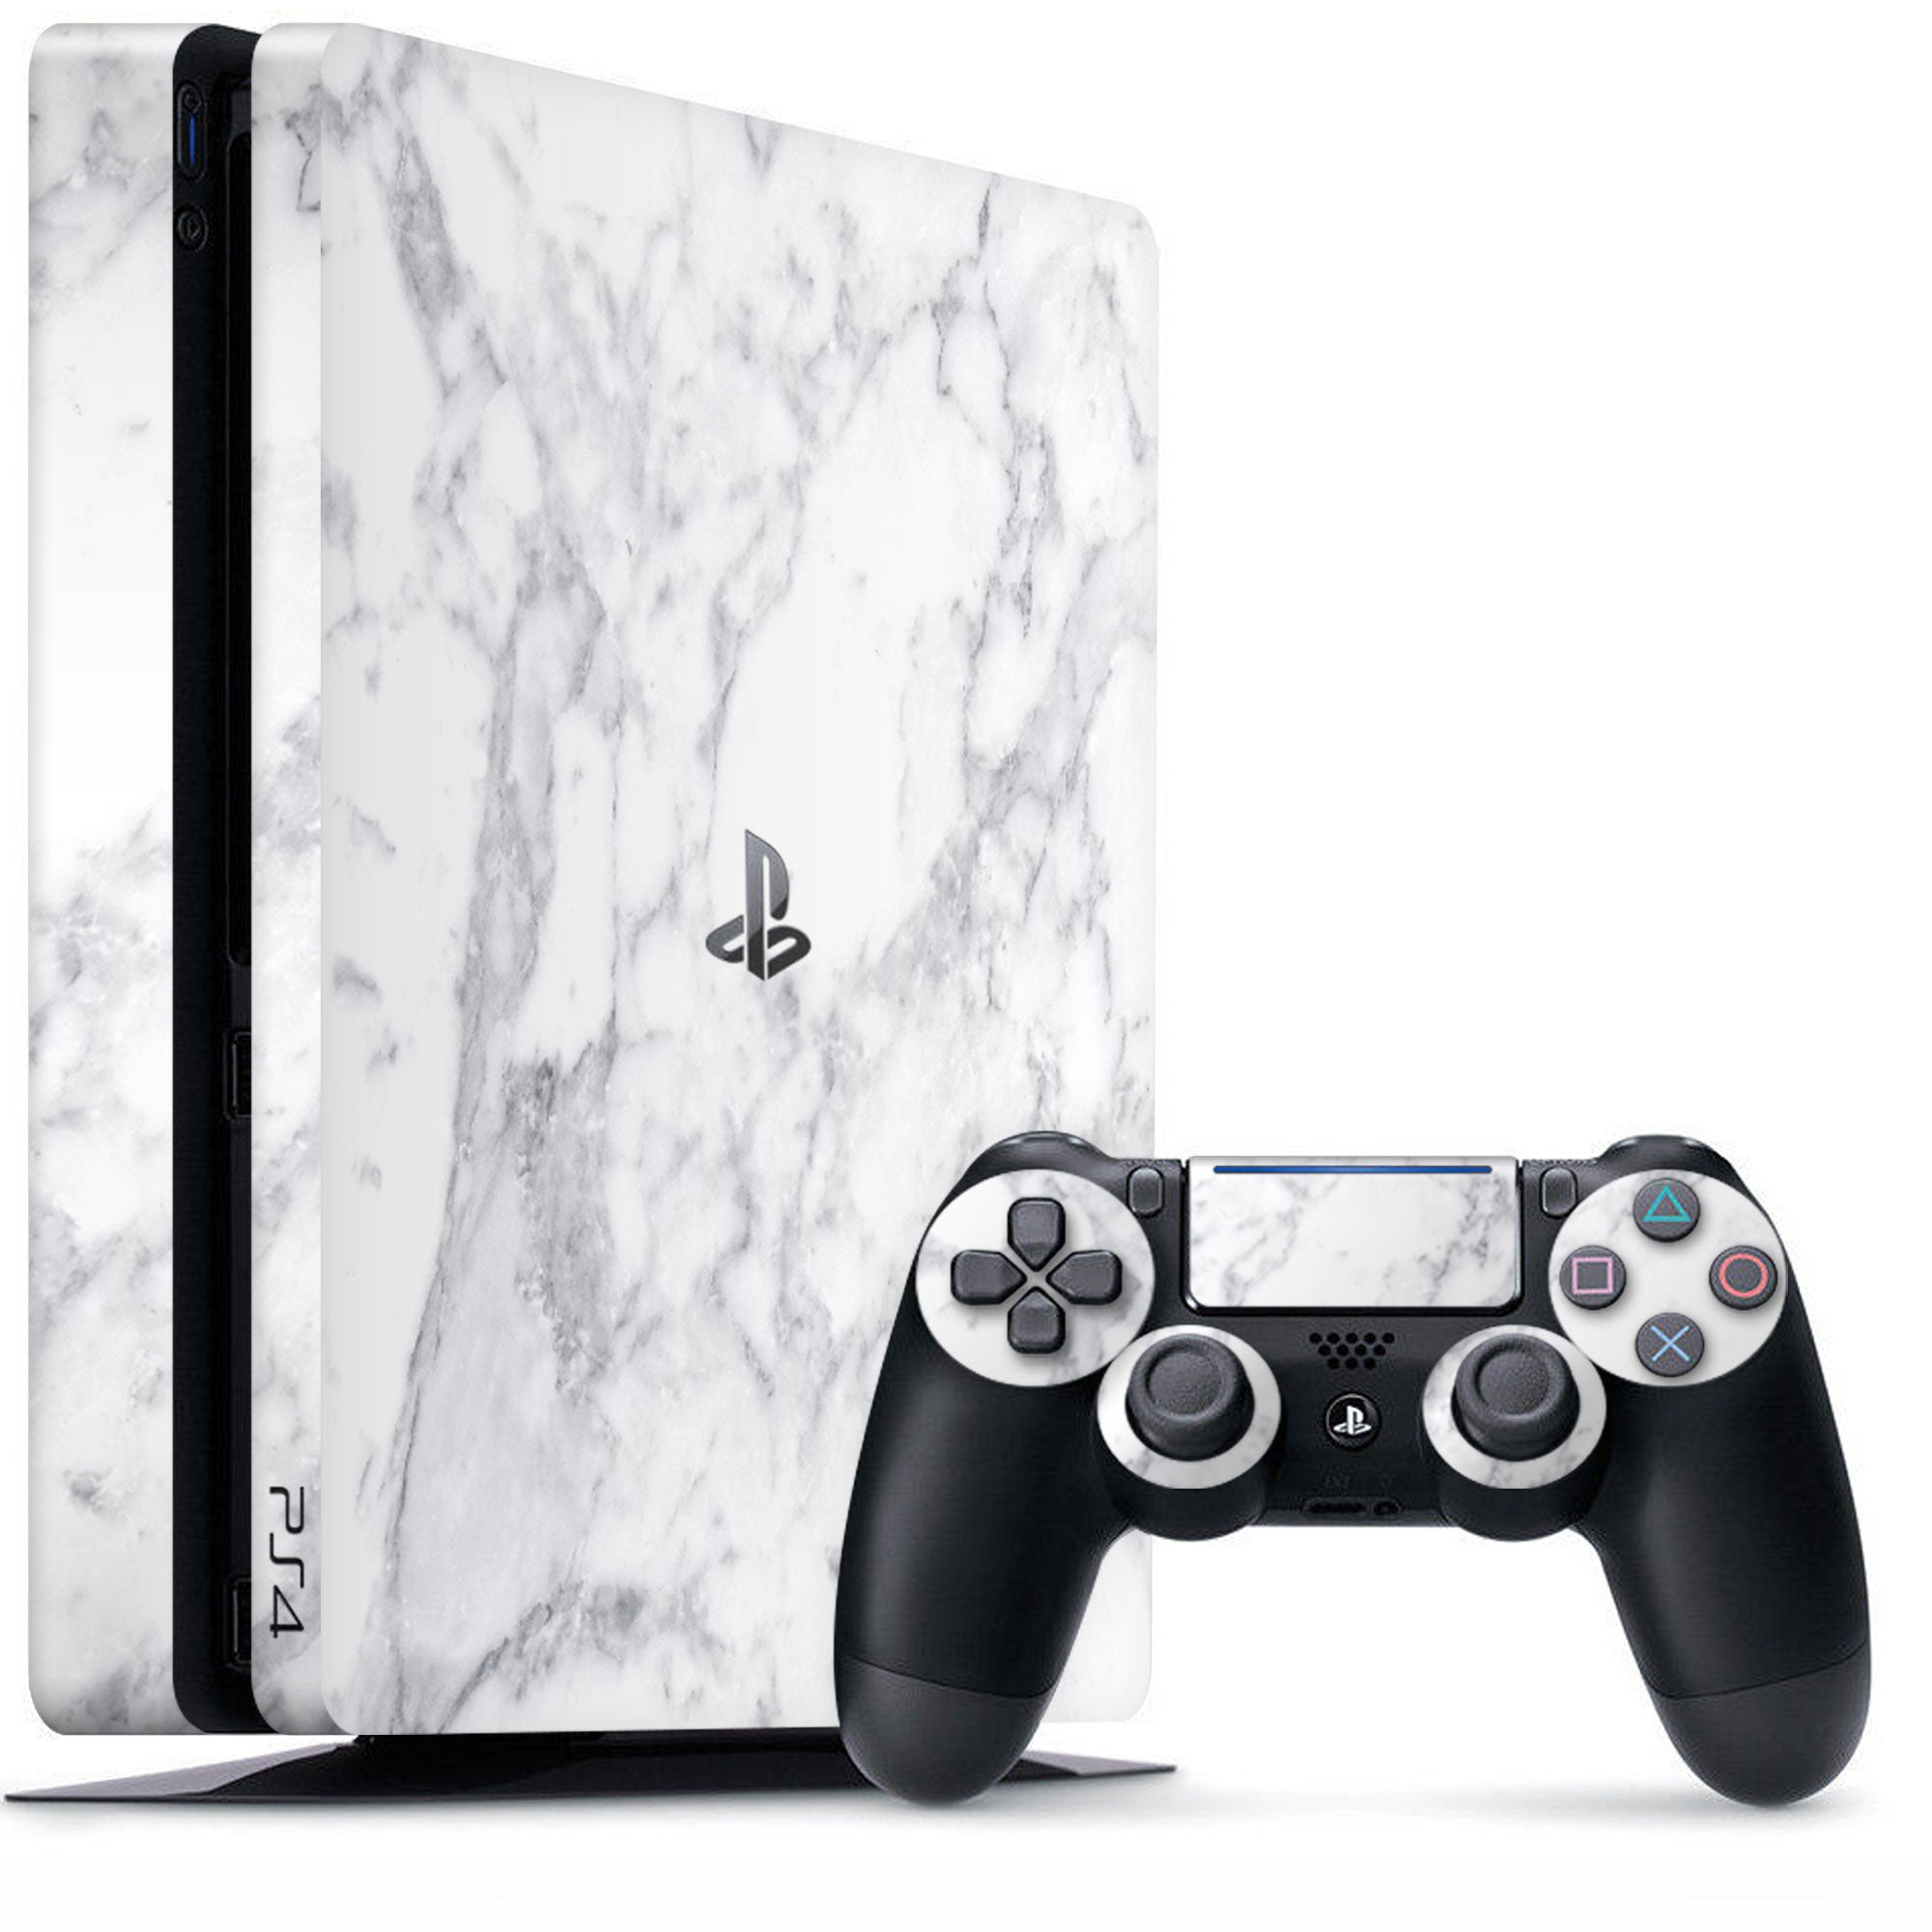 playstation white